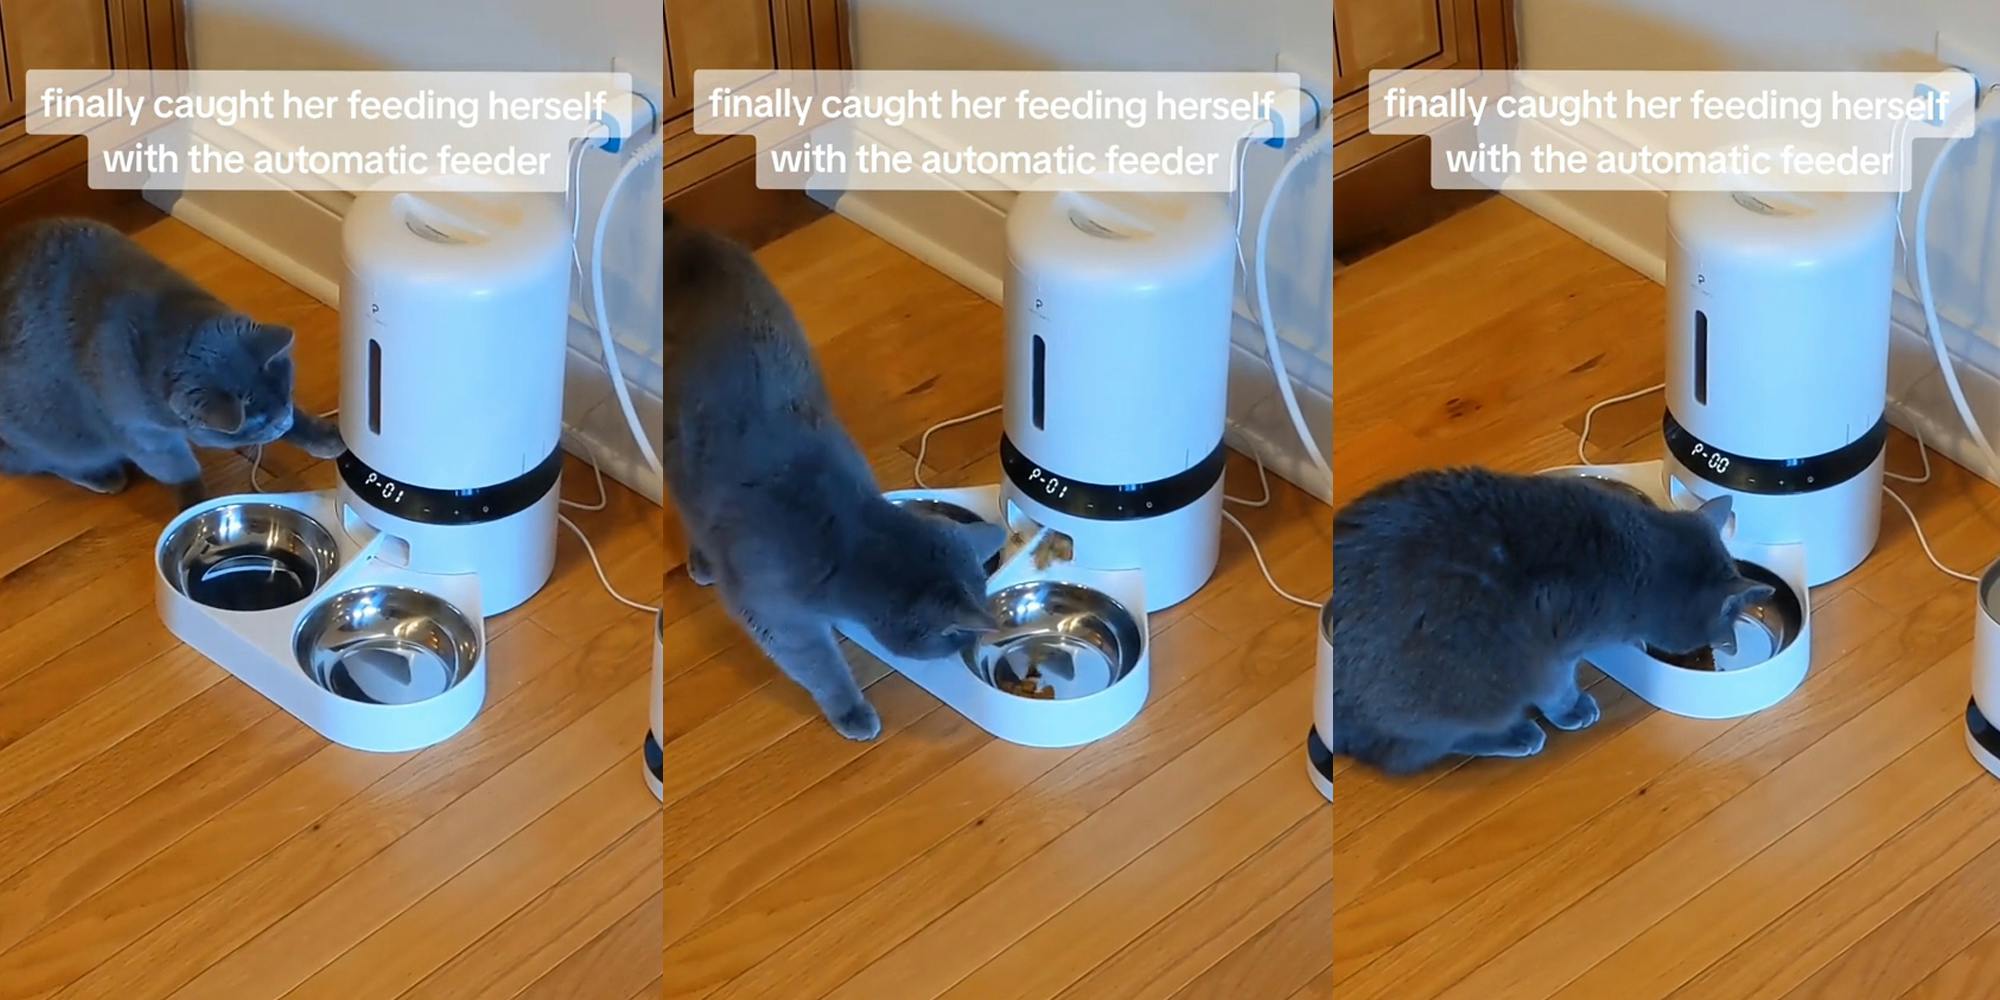 cat using automatic feeder with caption "finally caught her feeding herself with the automatic feeder" (l) cat using automatic feeder with caption "finally caught her feeding herself with the automatic feeder" (c) cat using automatic feeder with caption "finally caught her feeding herself with the automatic feeder" (r)